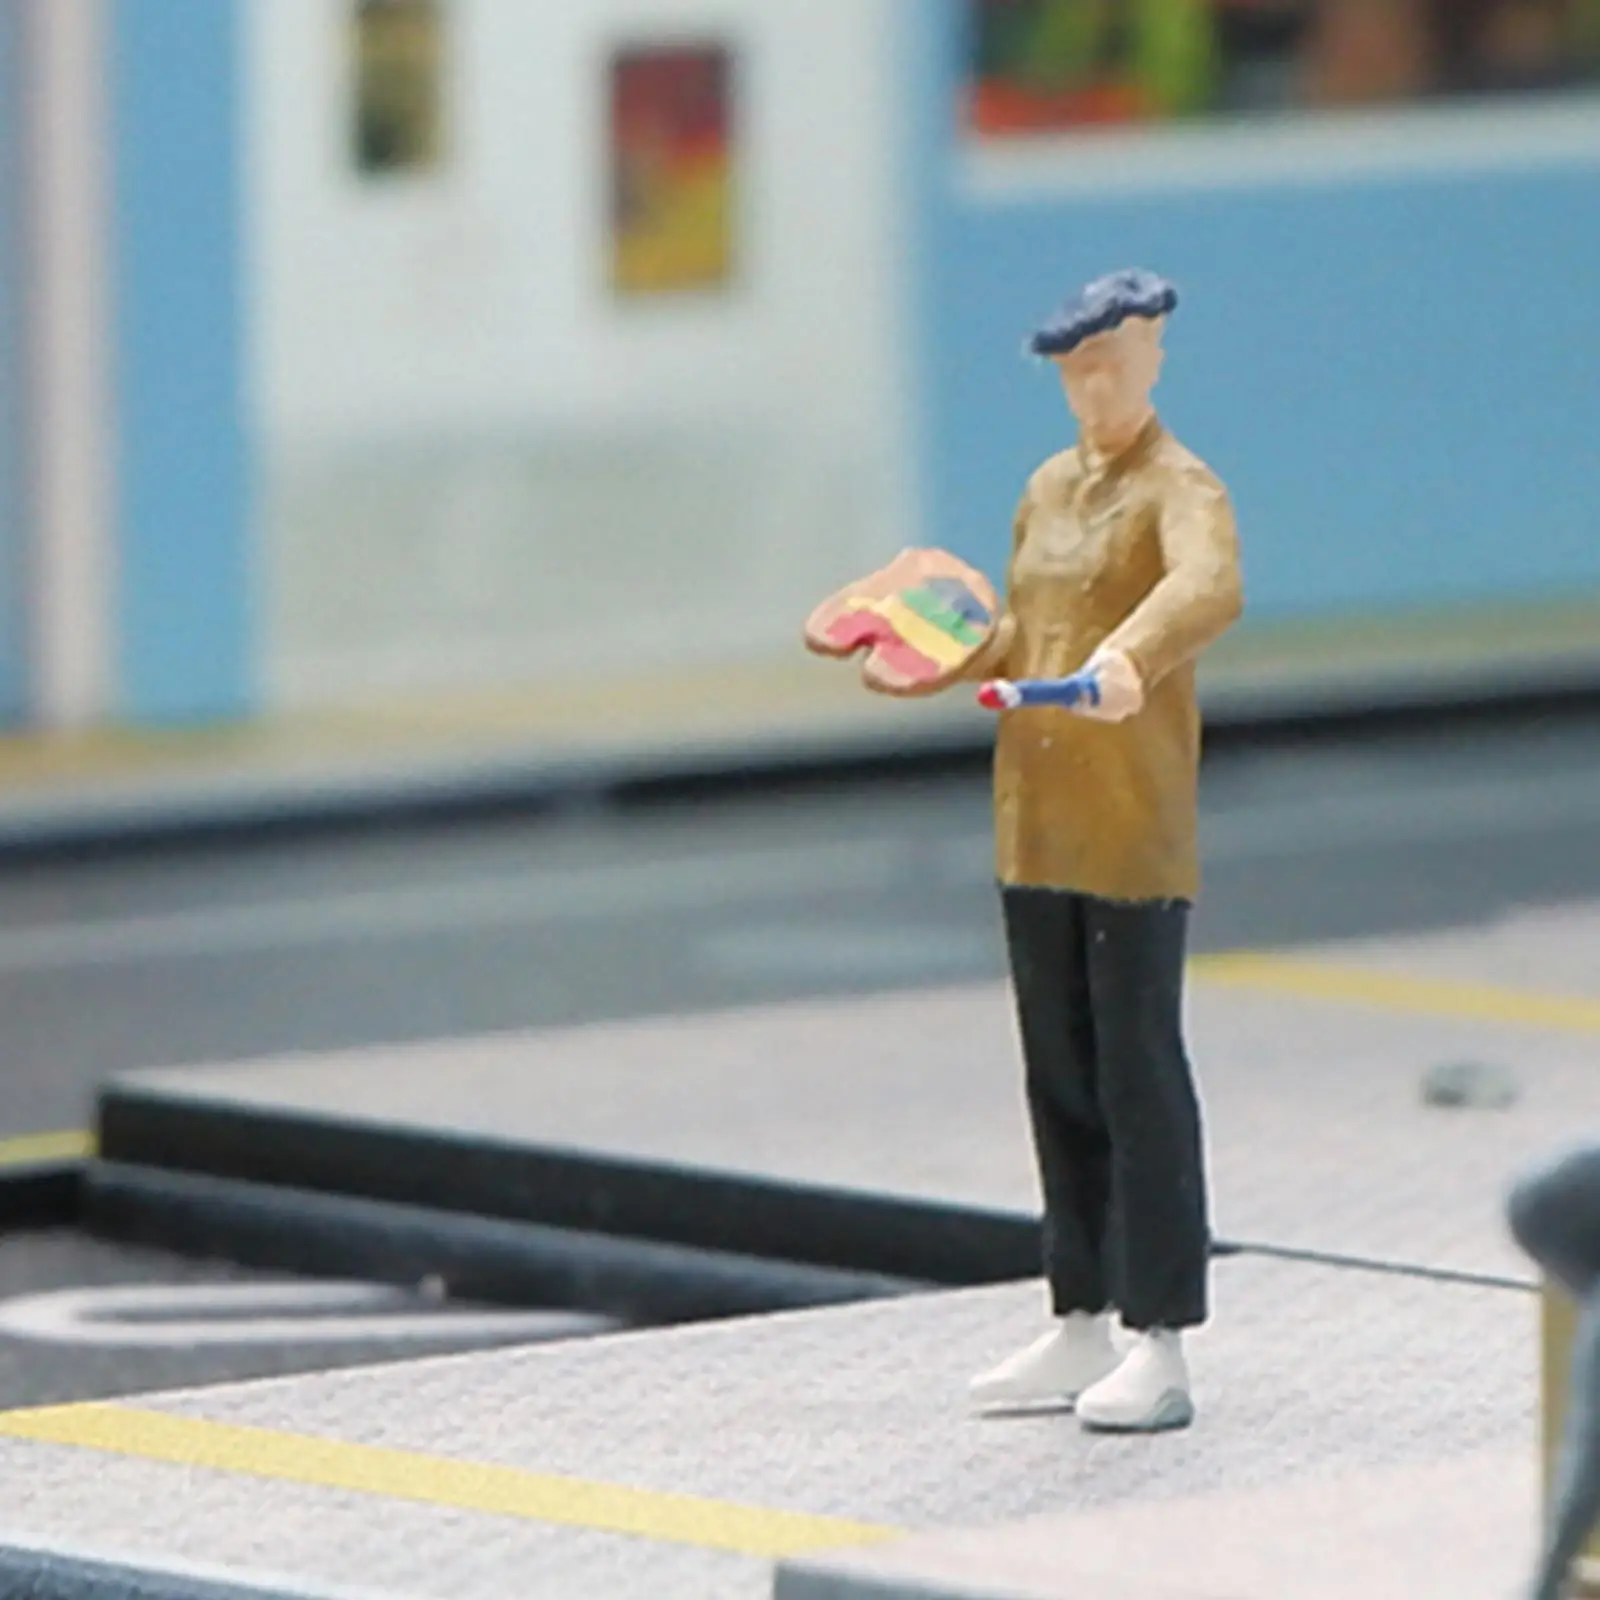 1/64 Painter Figures Hand Painted People Figurines for Train Station Layout Diorama Model Train Layout Sand Table DIY Scene